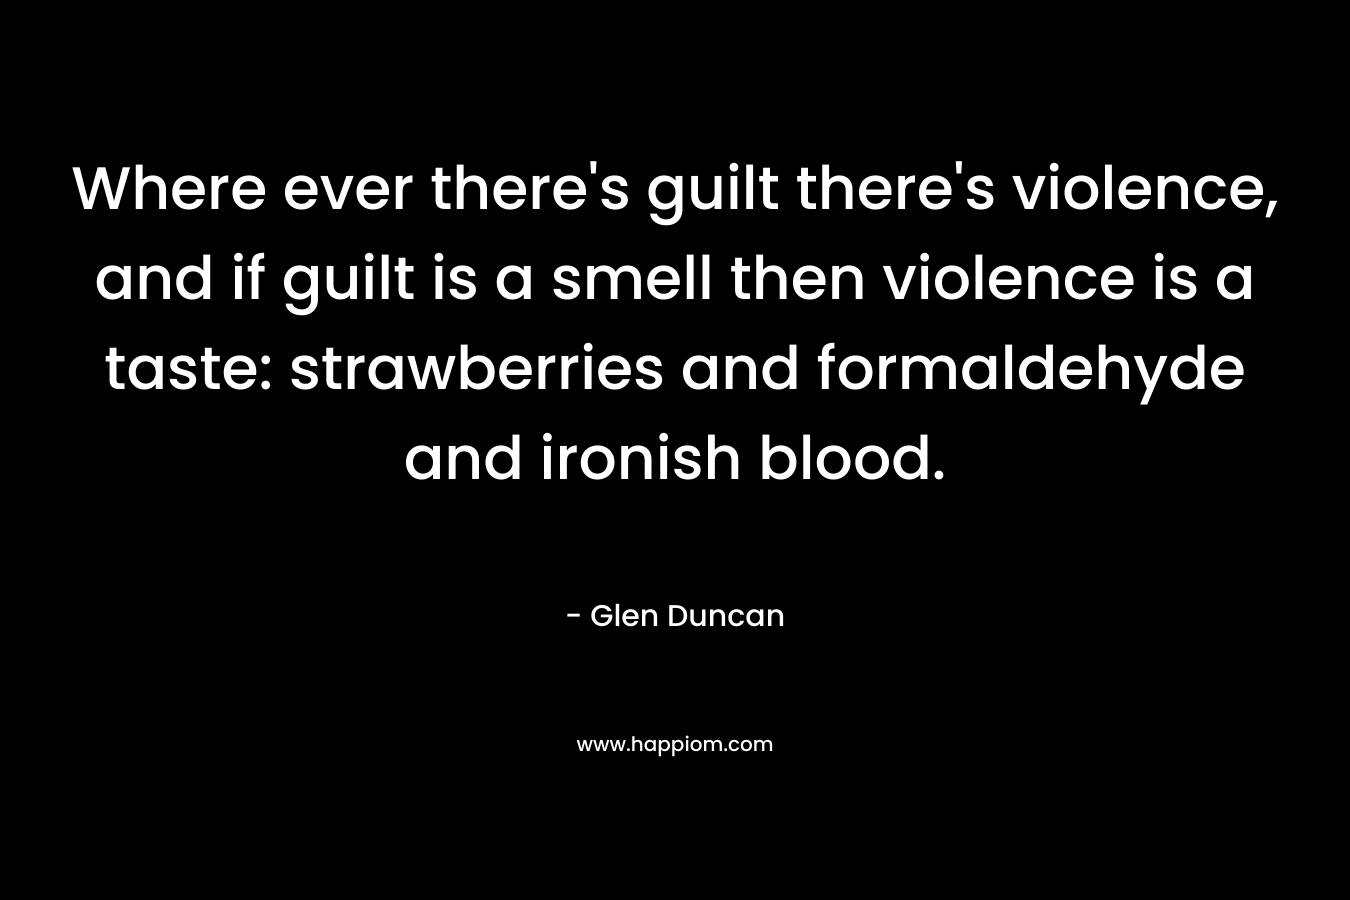 Where ever there’s guilt there’s violence, and if guilt is a smell then violence is a taste: strawberries and formaldehyde and ironish blood. – Glen Duncan